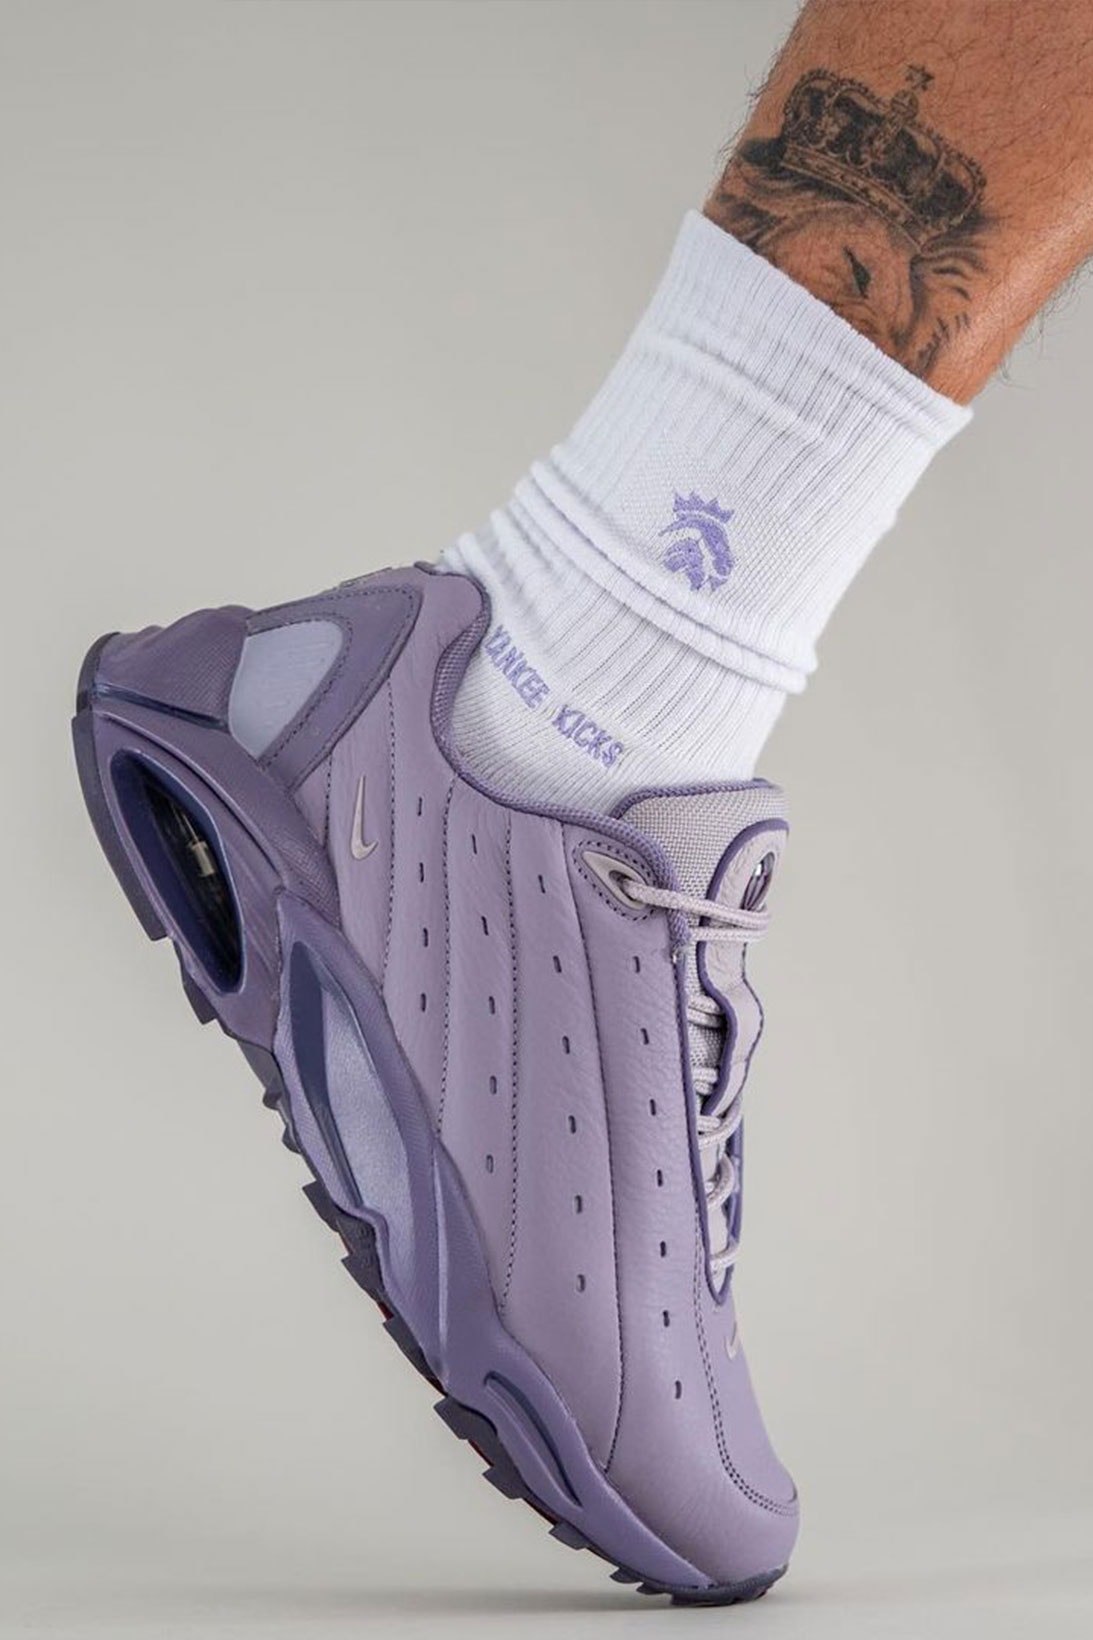 Drake NOCTA Nike Hot Step Air Terra Purple Lilac Colorway Release Images Info